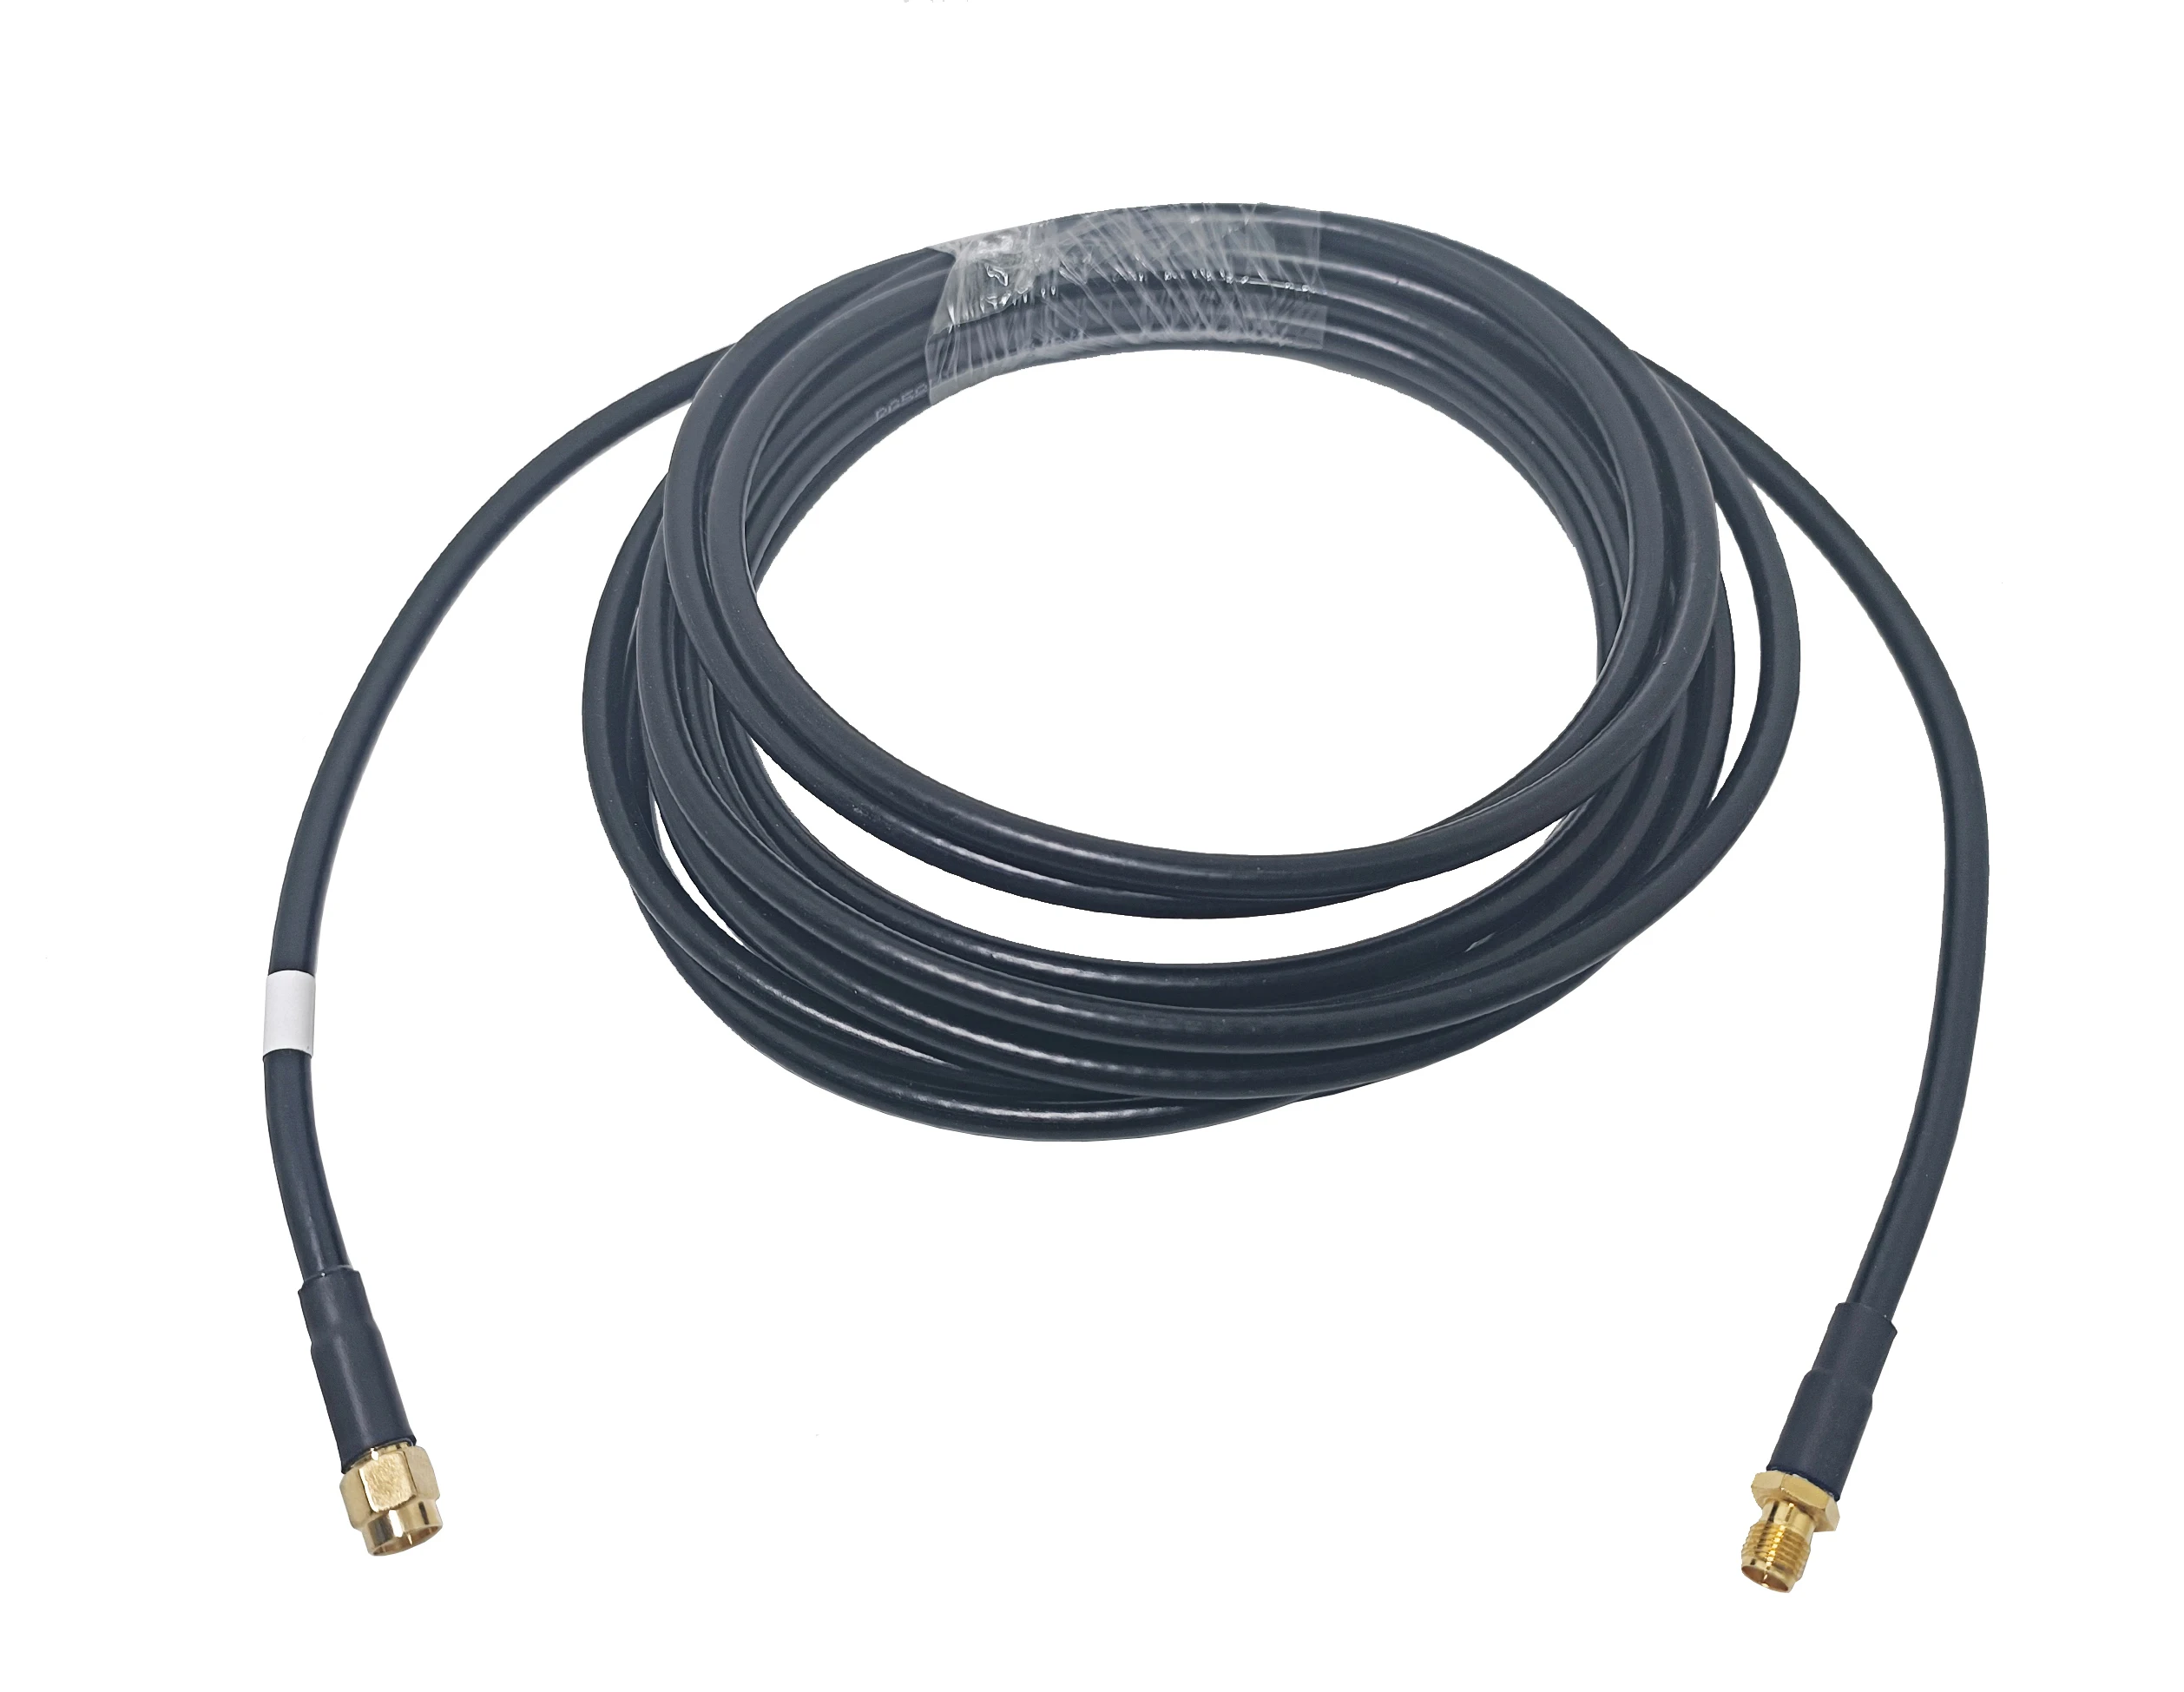 high quality RG58 lmr195 LMR200  RP SMA female to  RP SMA male cable assembly supplier